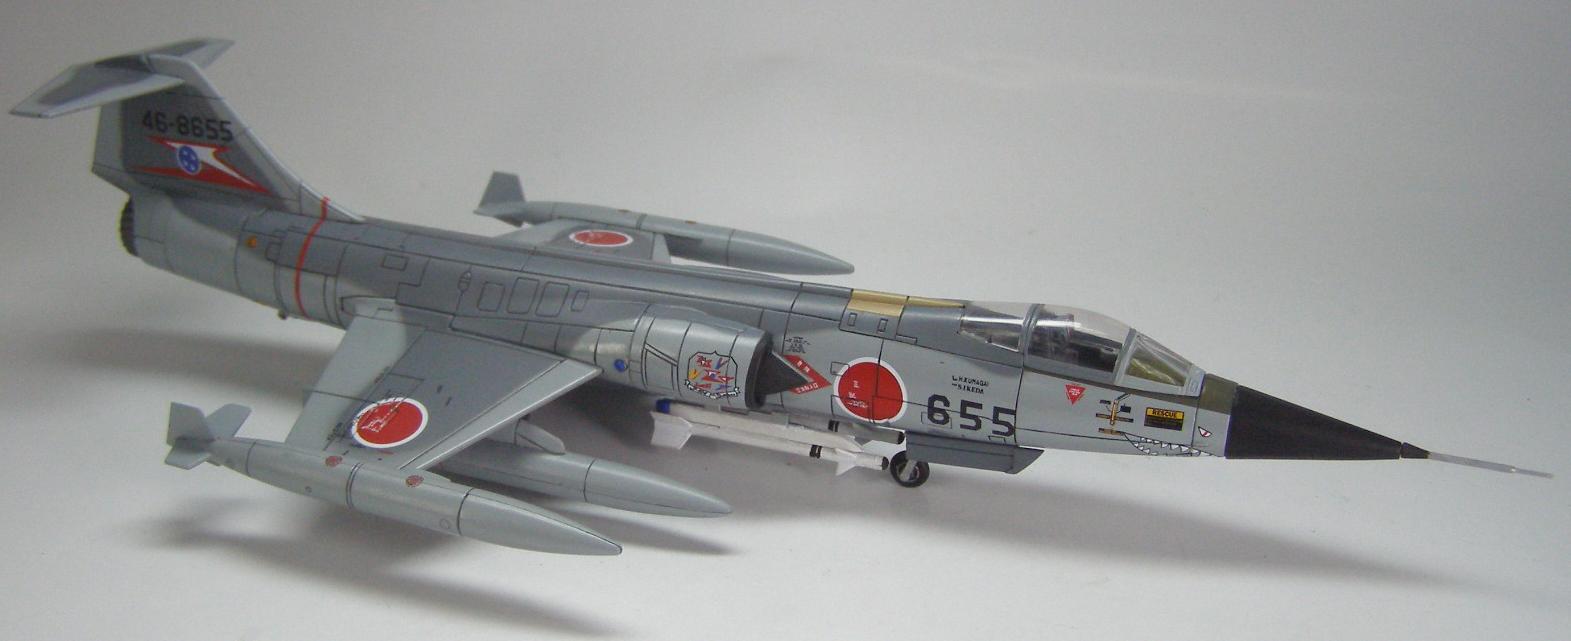 Japanese F-104J Starfighter 207th squadron 83rd Air Group Japan 